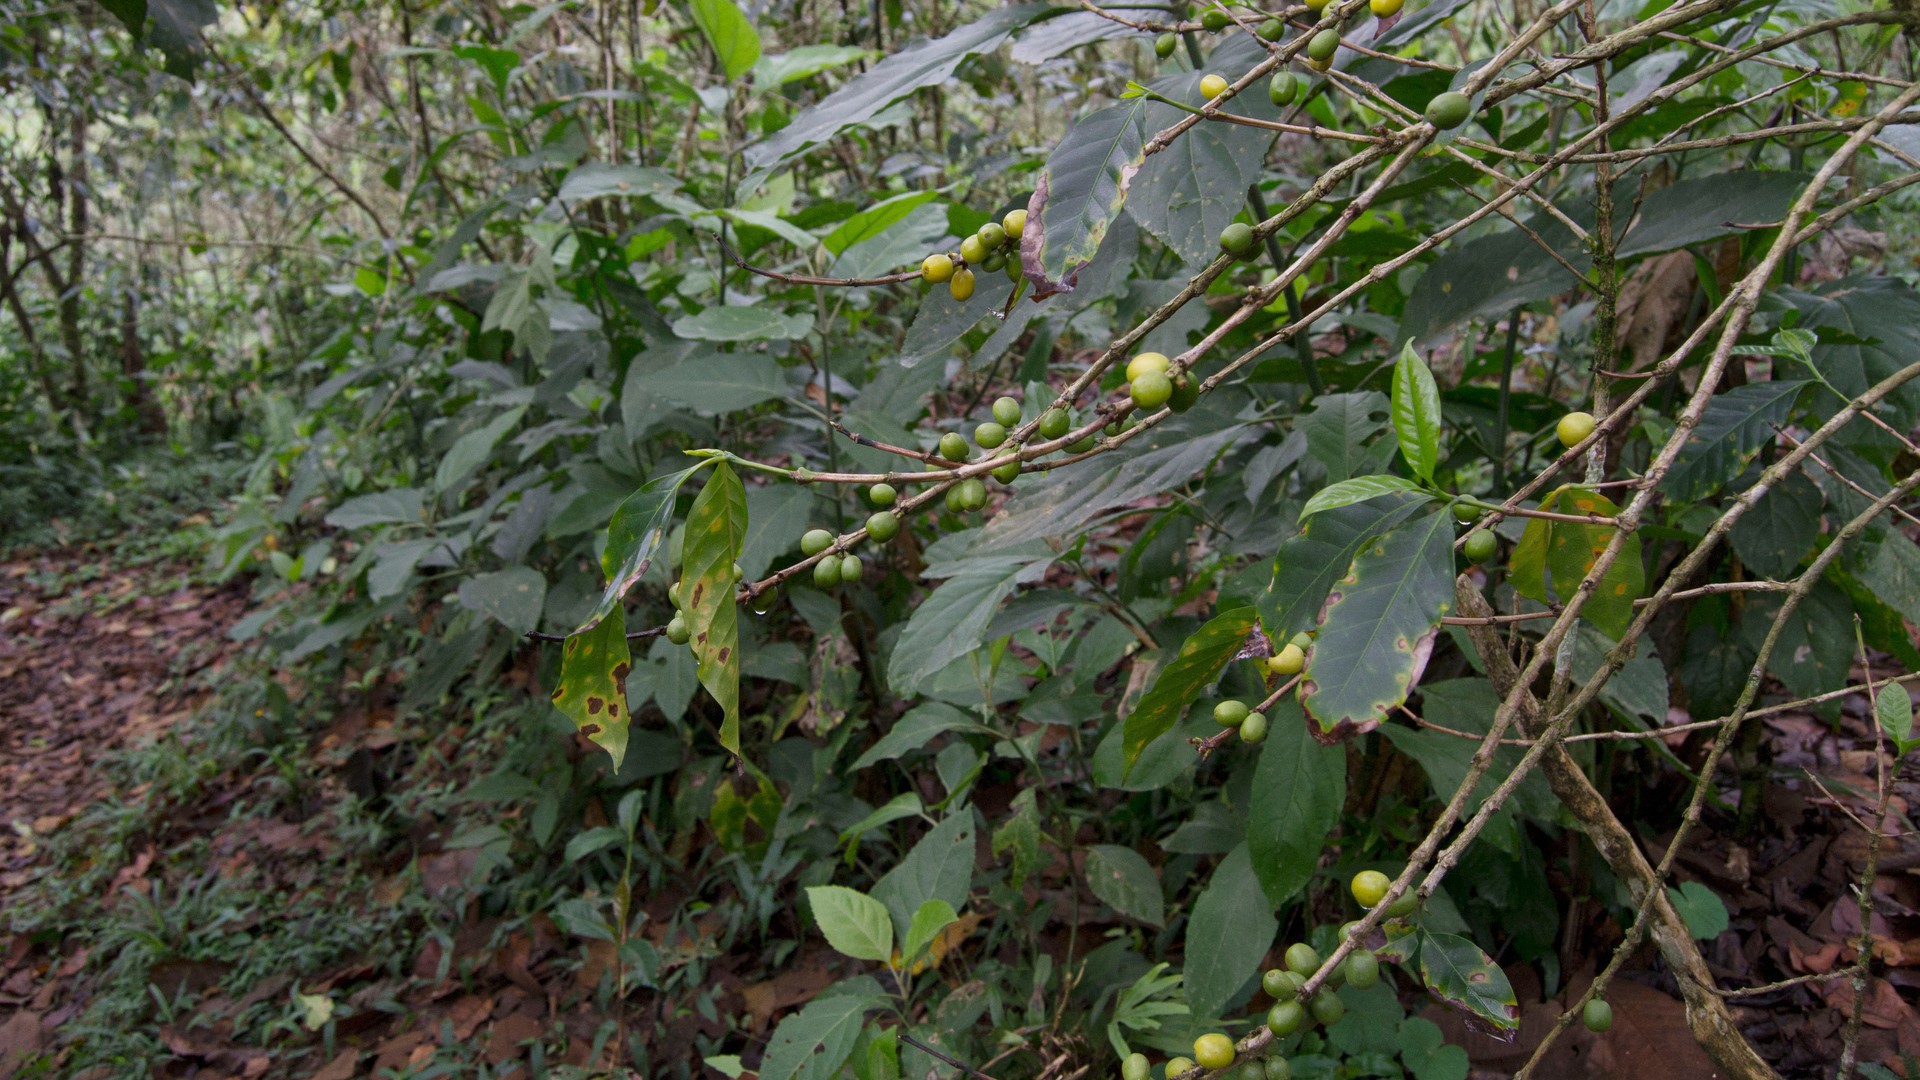 Coffee cherries ripen on the branches of a plant on an indigenous farmer's plot in a cloud forest in the highlands of Chiapas, Mexico. (Photo by Marlena Sauceda.)